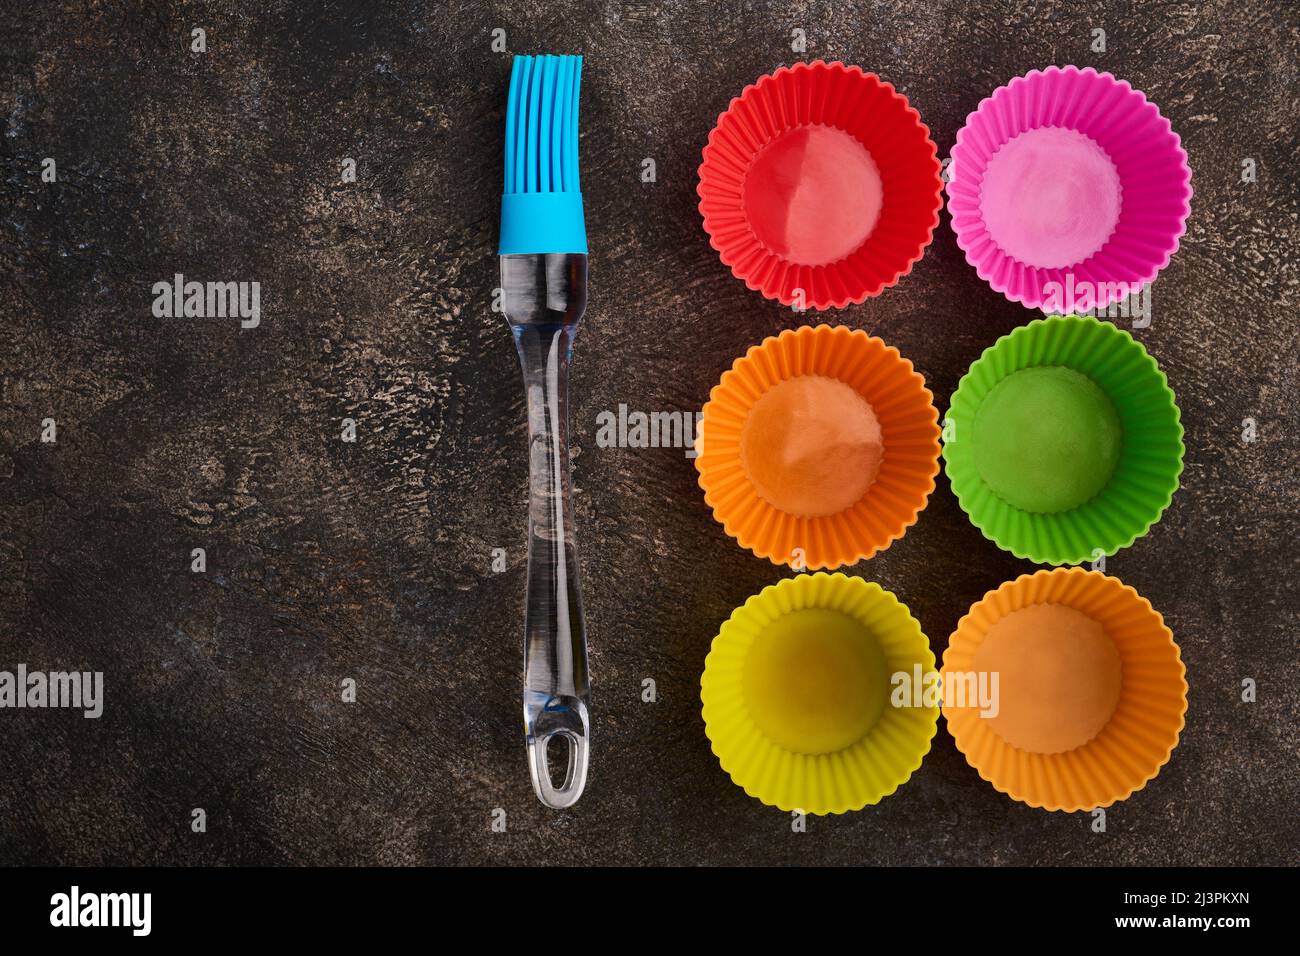 Cooking silicone brush and silicone cupcake molds, close up, on dark background Stock Photo